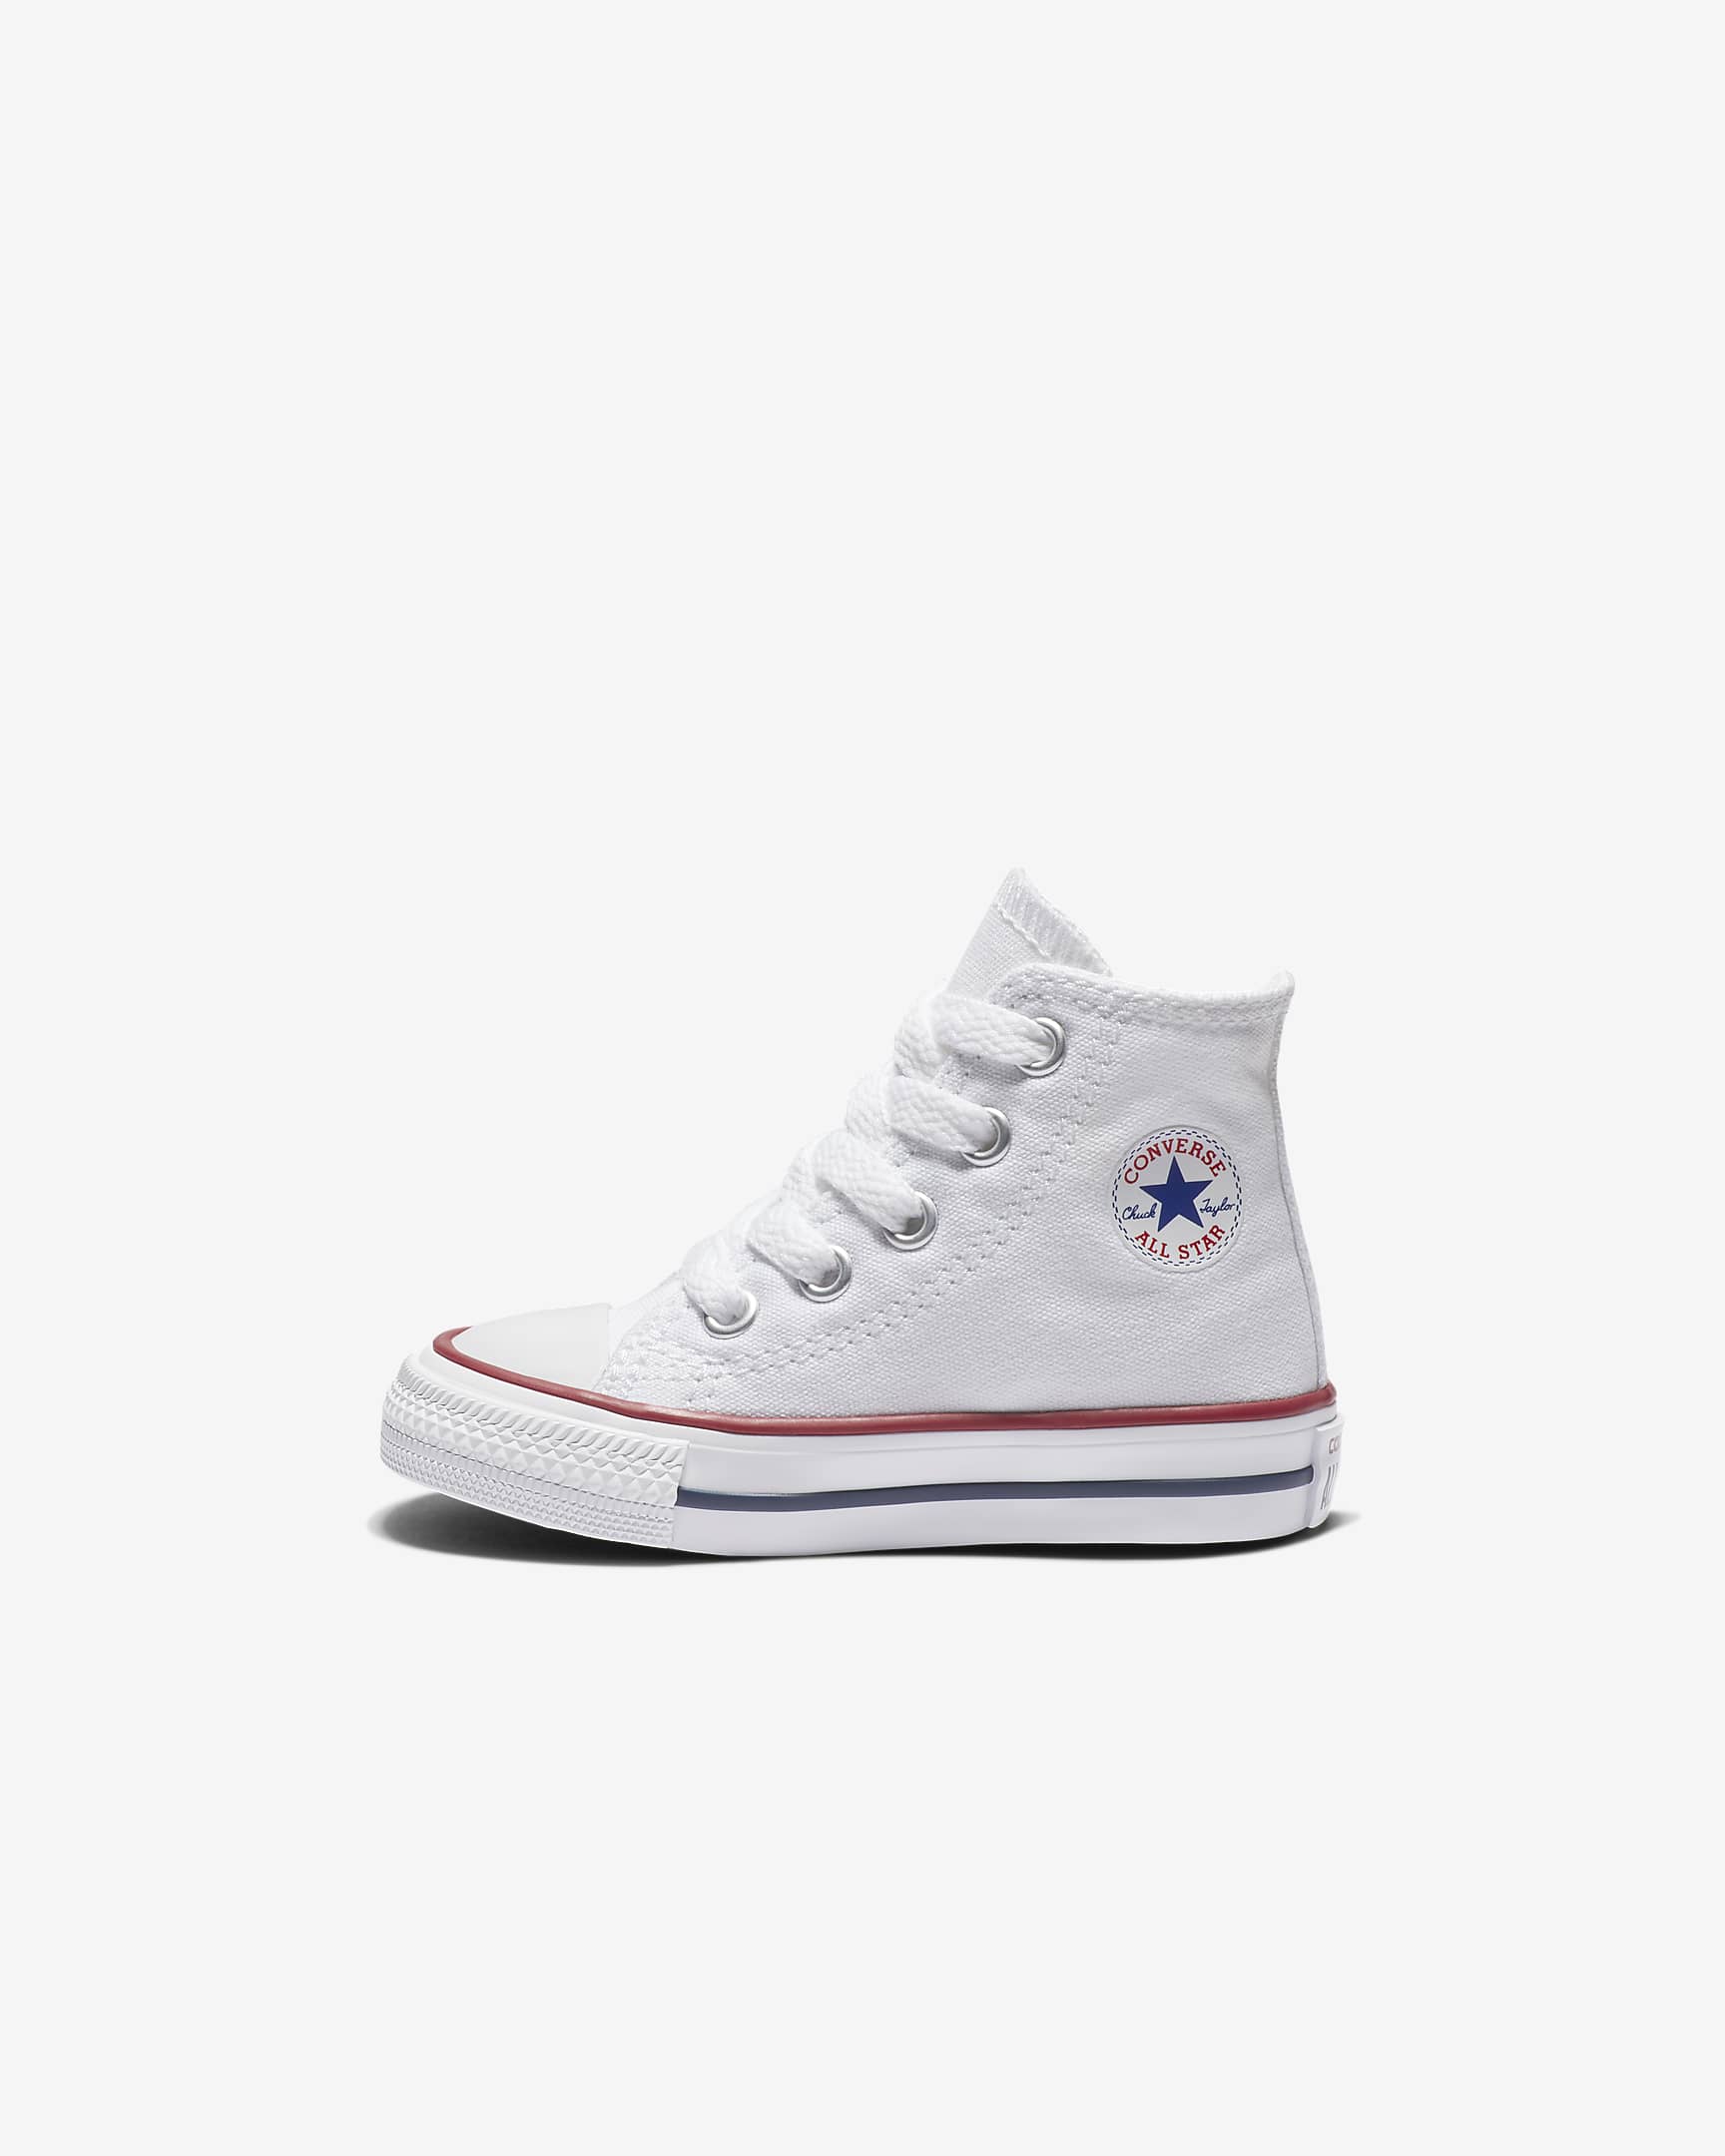 Converse Chuck Taylor All Star High Top (2c-10c) Infant/Toddler Shoe ...